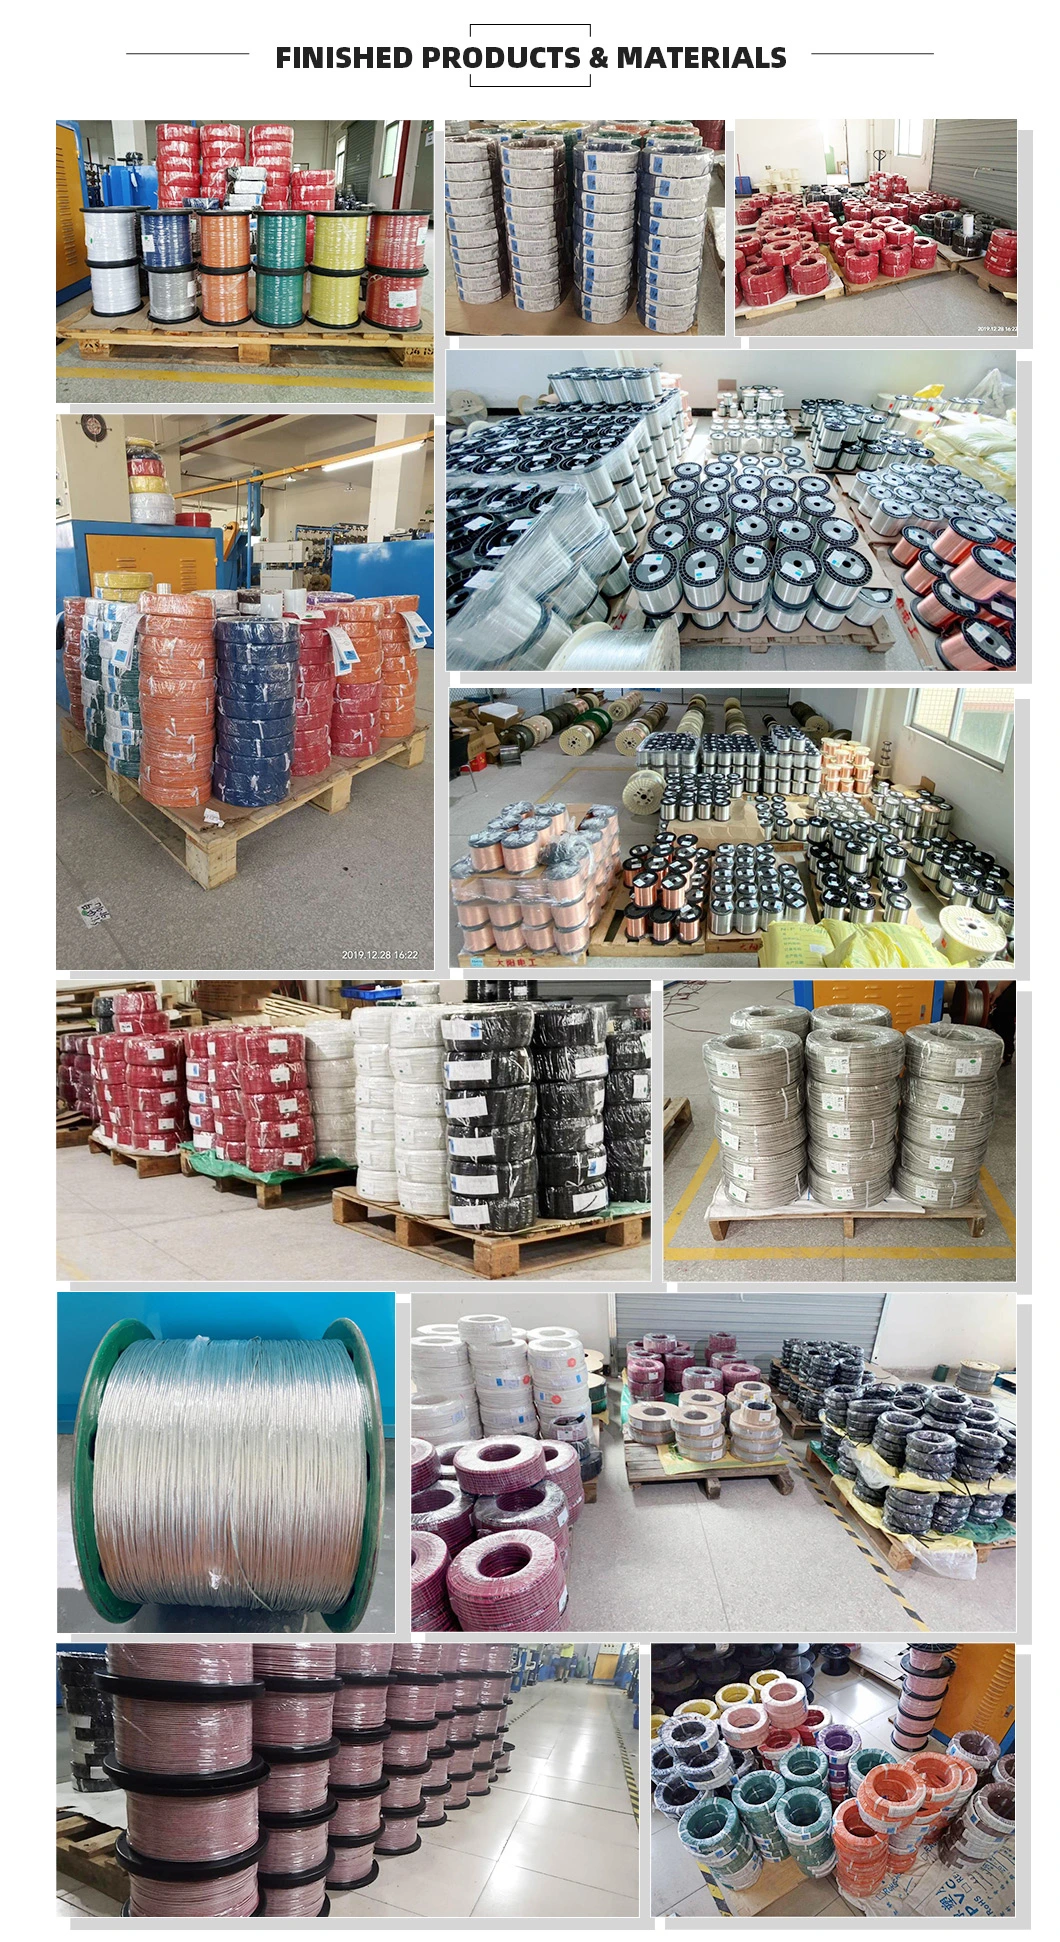 BV Cable Electrical Cable Wire Electrical Wires Price 2.5mm2